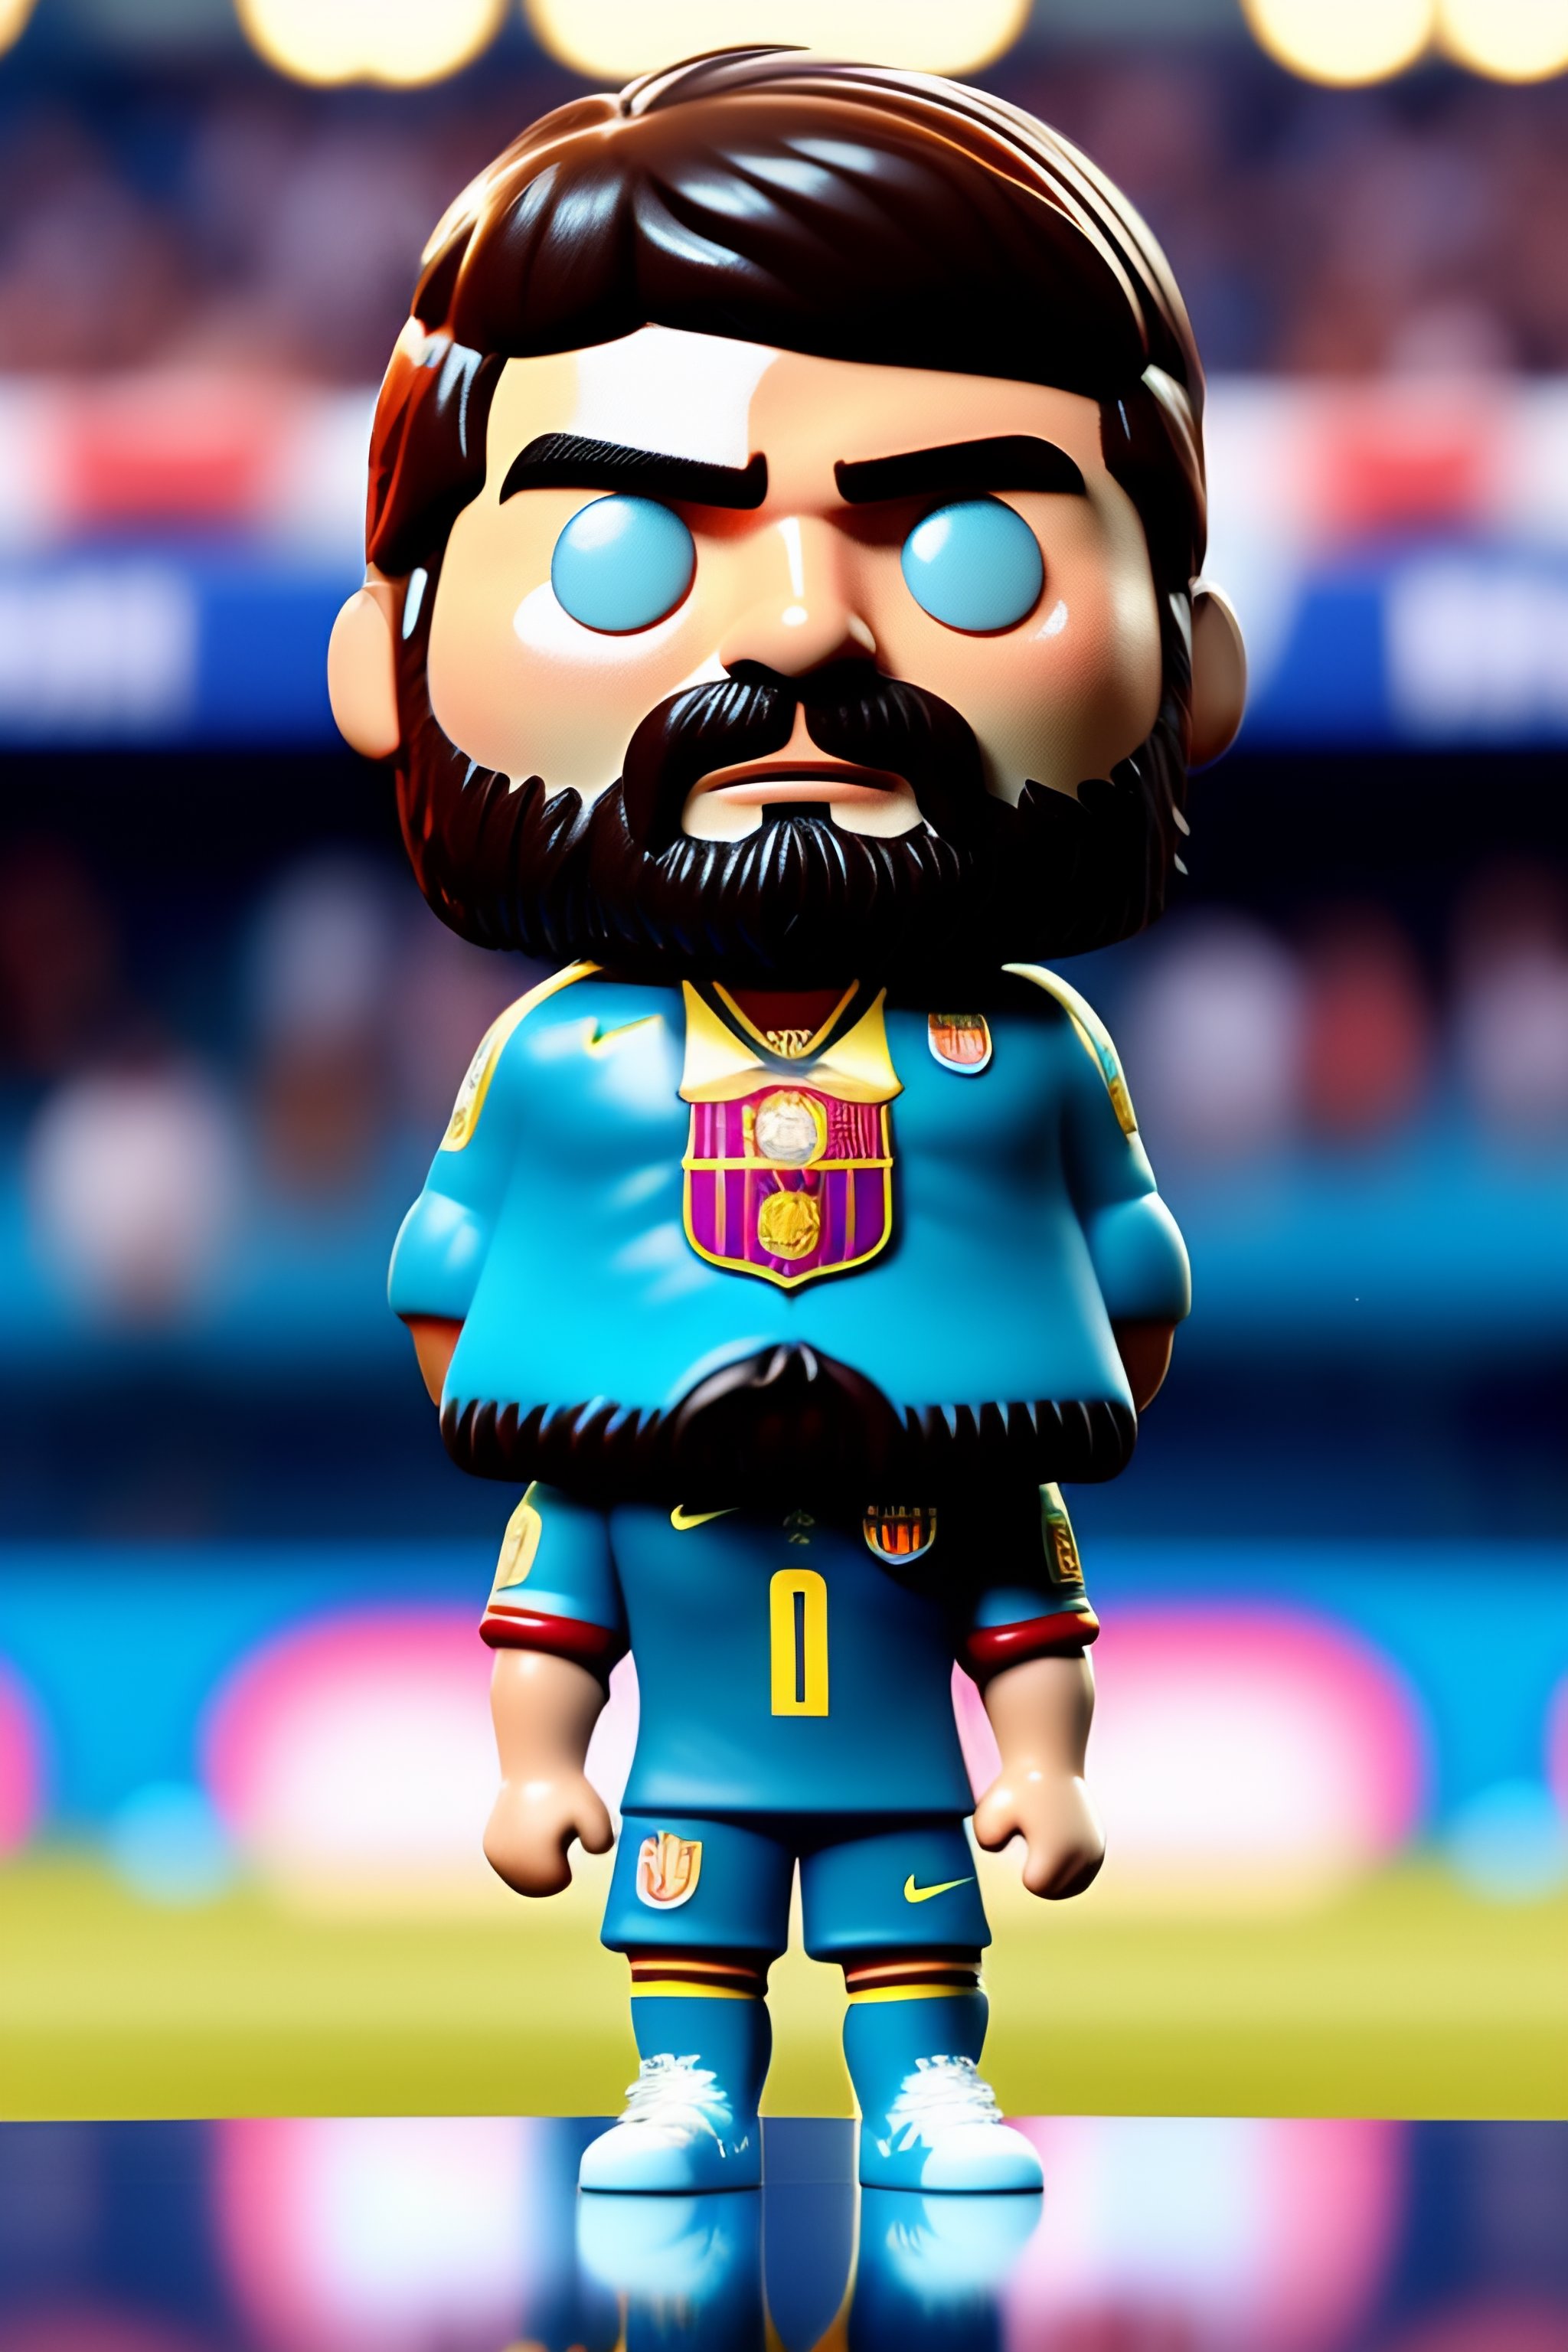 ArtStation - Funko Pop Messi with World Cup